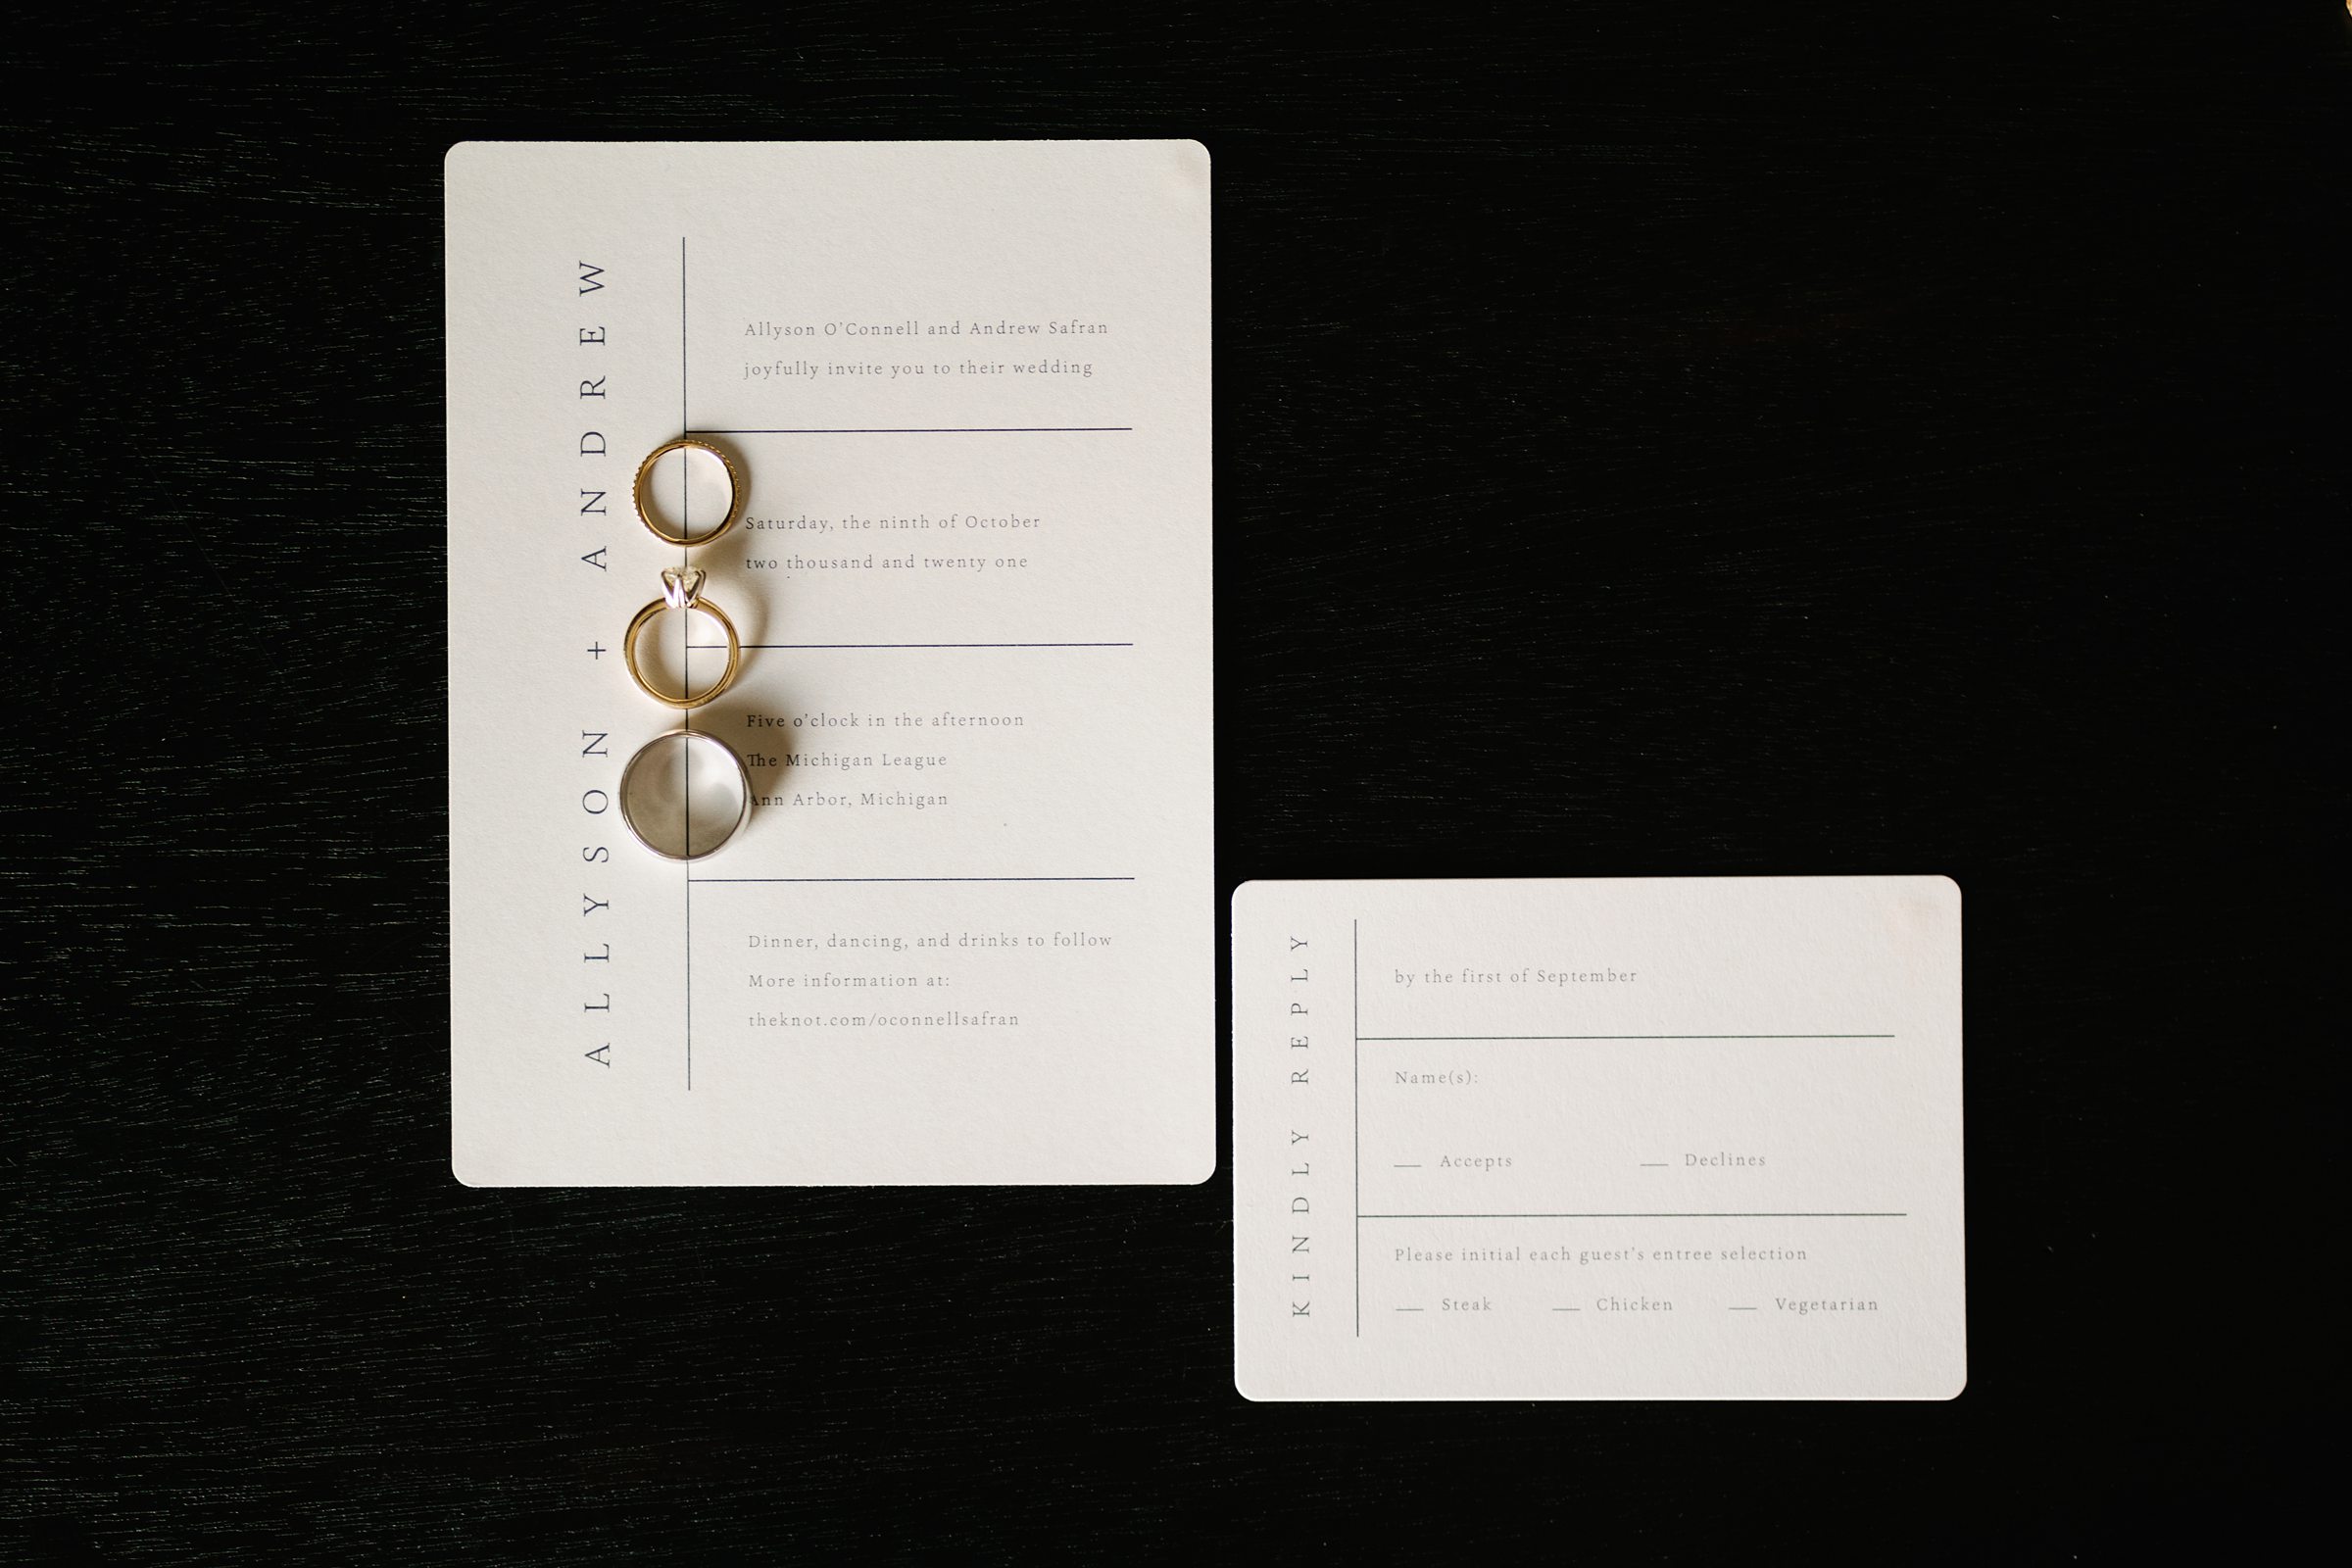 Detailed shot of the wedding invitation along with the bride and groom's rings by Detroit Wedding Photographer Michele Maloney